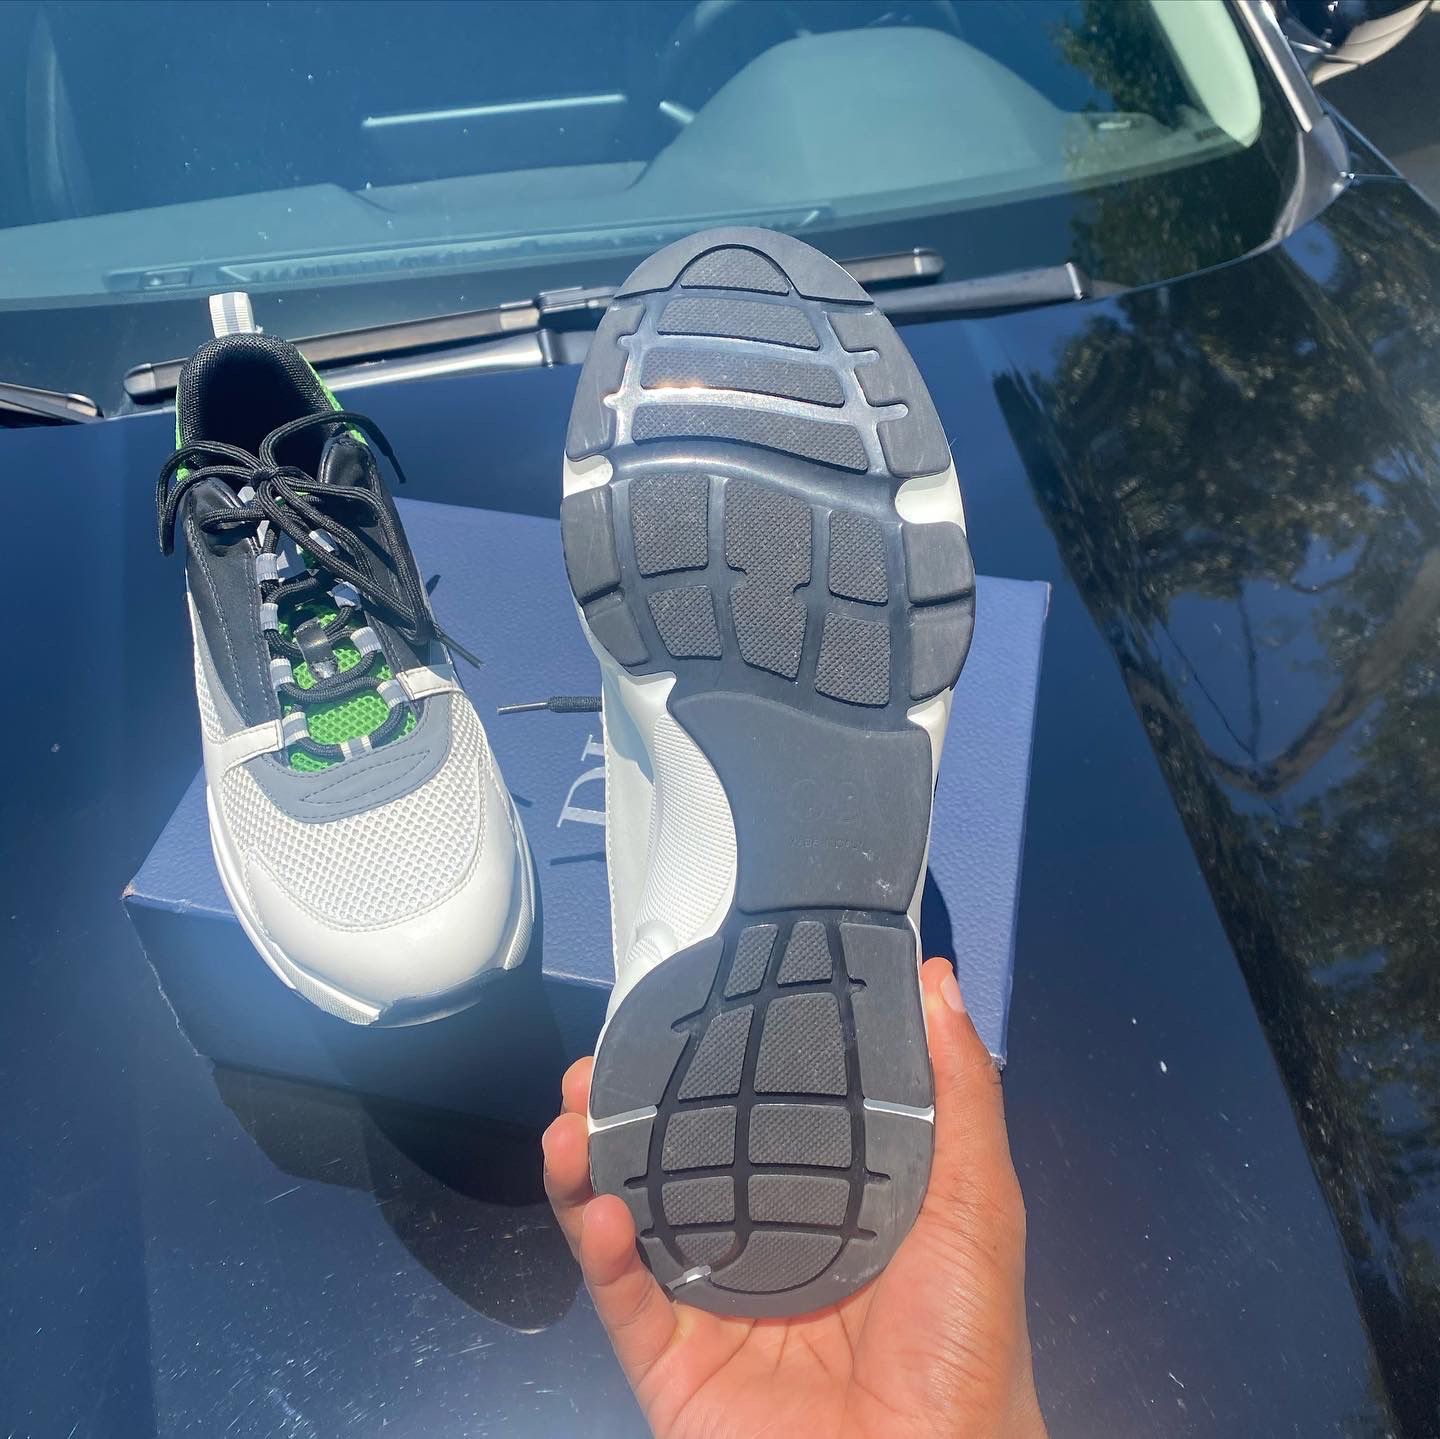 Dior B22 Signature Print Shoes for Sale in Orlando, FL - OfferUp